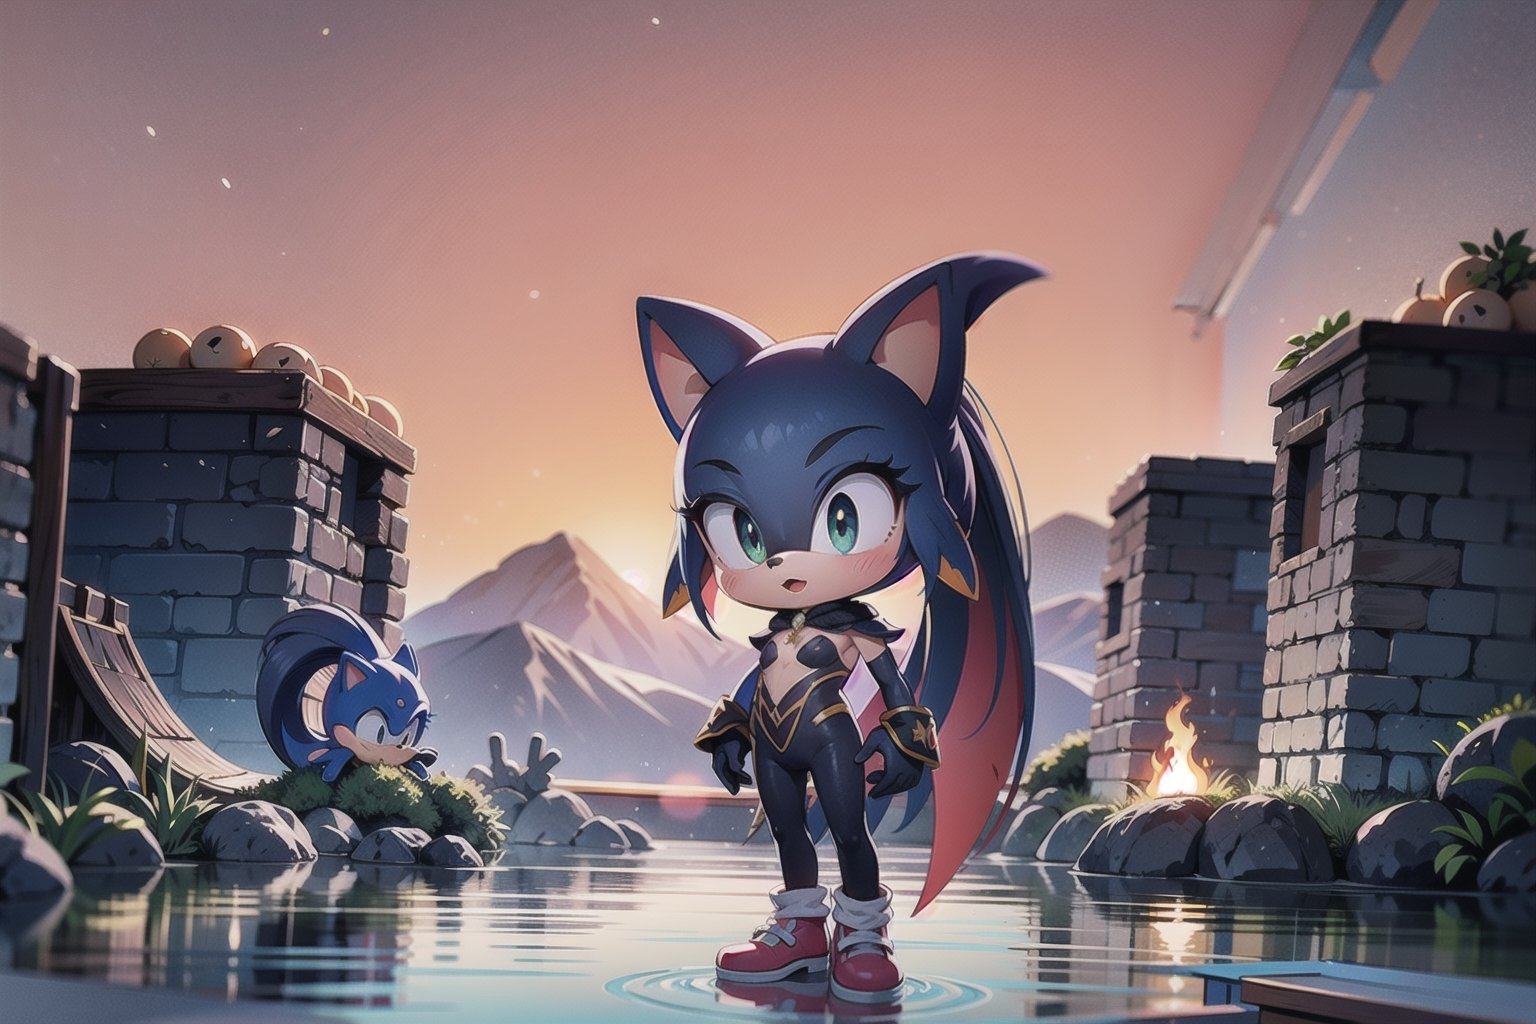 Against the backdrop of the beautiful island of Looney, little Monadef and Sonic the Hedgehog stand defiant, their dark silhouettes etched against a orange sky. Sonic the Hedgehog stands by her side, his blue spikes and red shoes a vivid splash against the dull gray stone. Every detail of their forms is rendered in stunning 32K UHD, as if they might step out of the frame at any moment. 